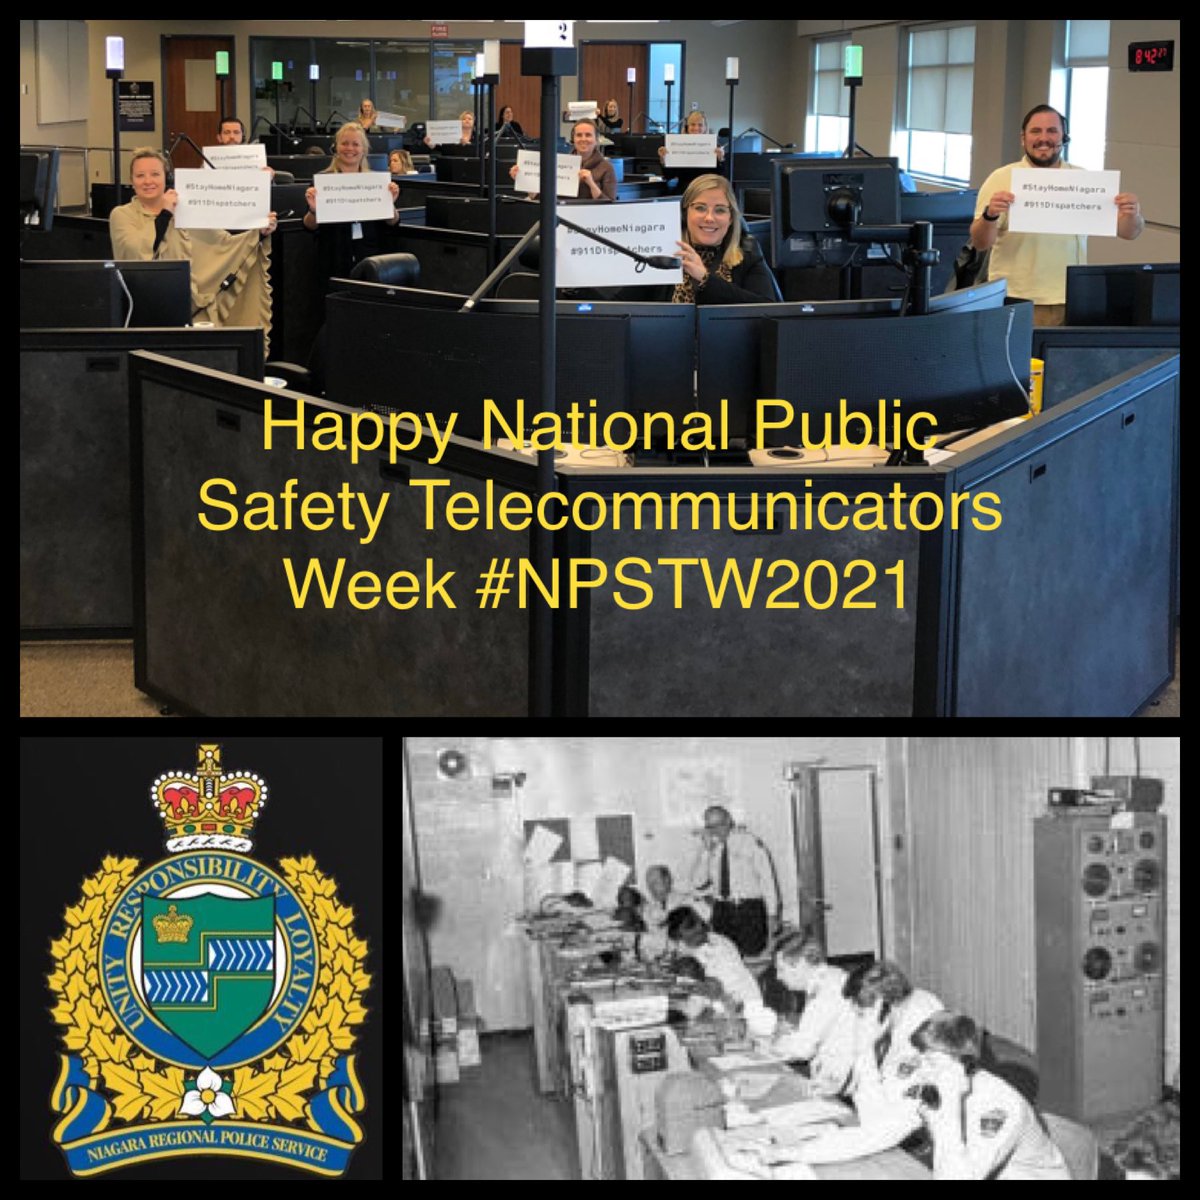 This National Public Safety Telecommunicators Week we recognize the dedicated professionals in our @NiagRegPolice Communications Unit.

Answering thousands of calls annually, these unsung heroes provide a vital lifeline to our officers and community. 
Thank you!
#NPSTW2021